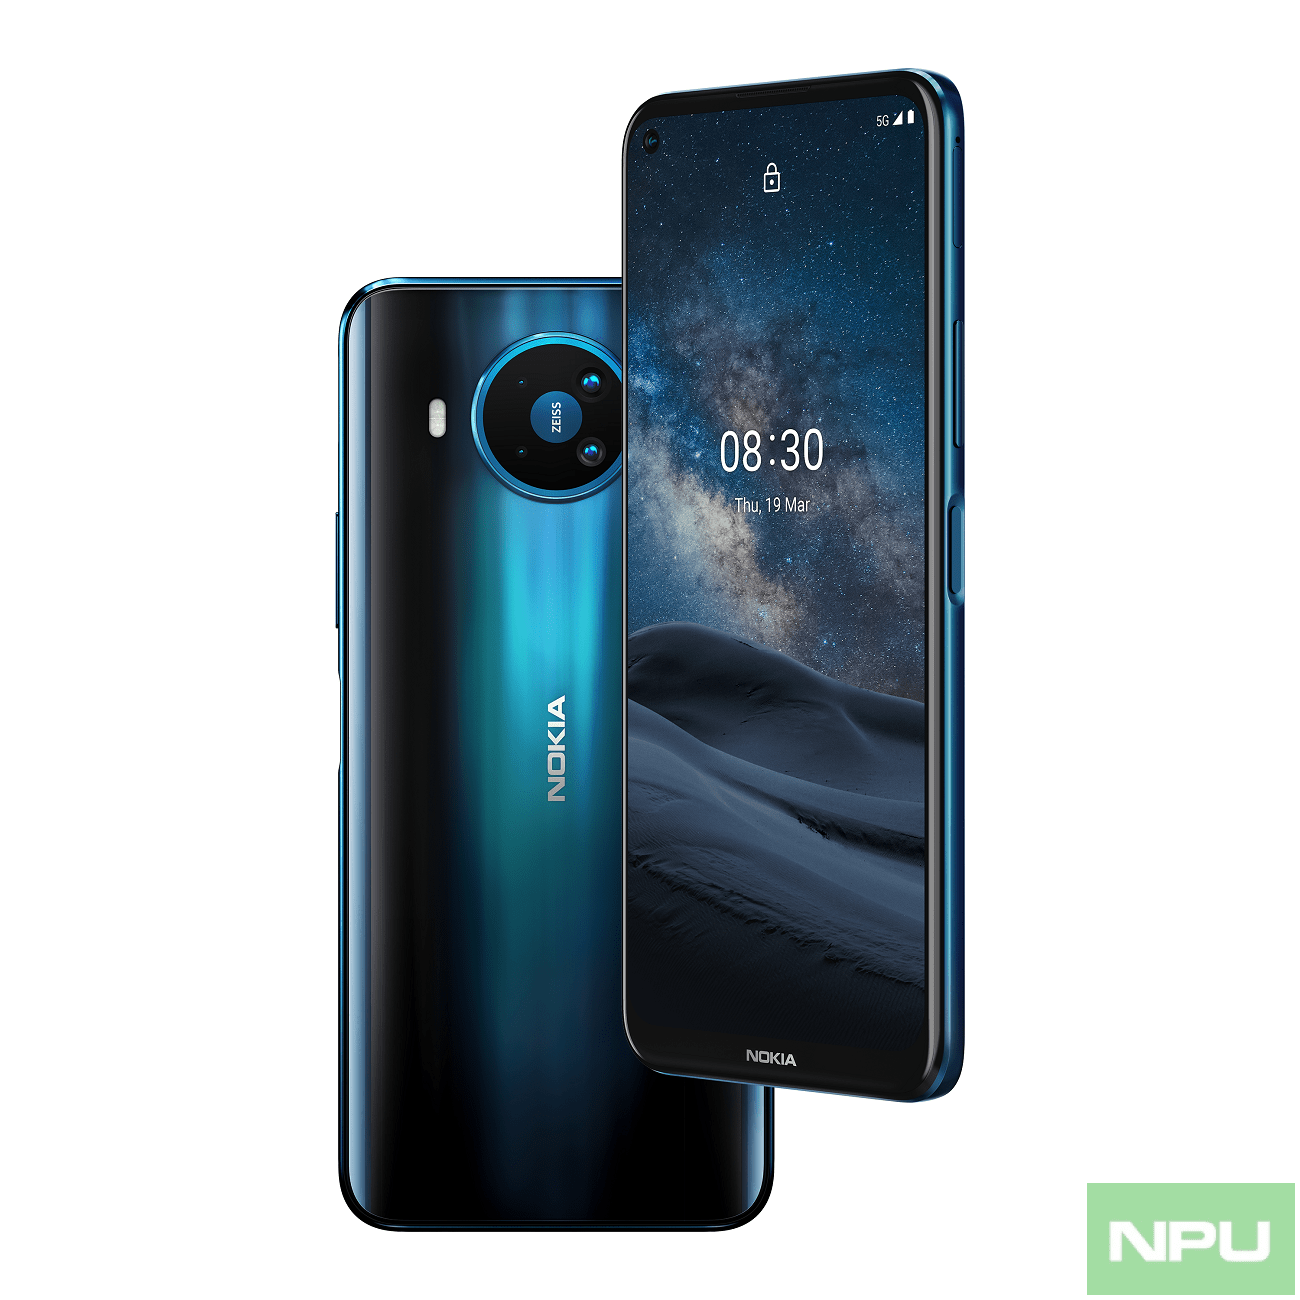 Nokia 8 3 Pureview 5g Specifications Price In India Release